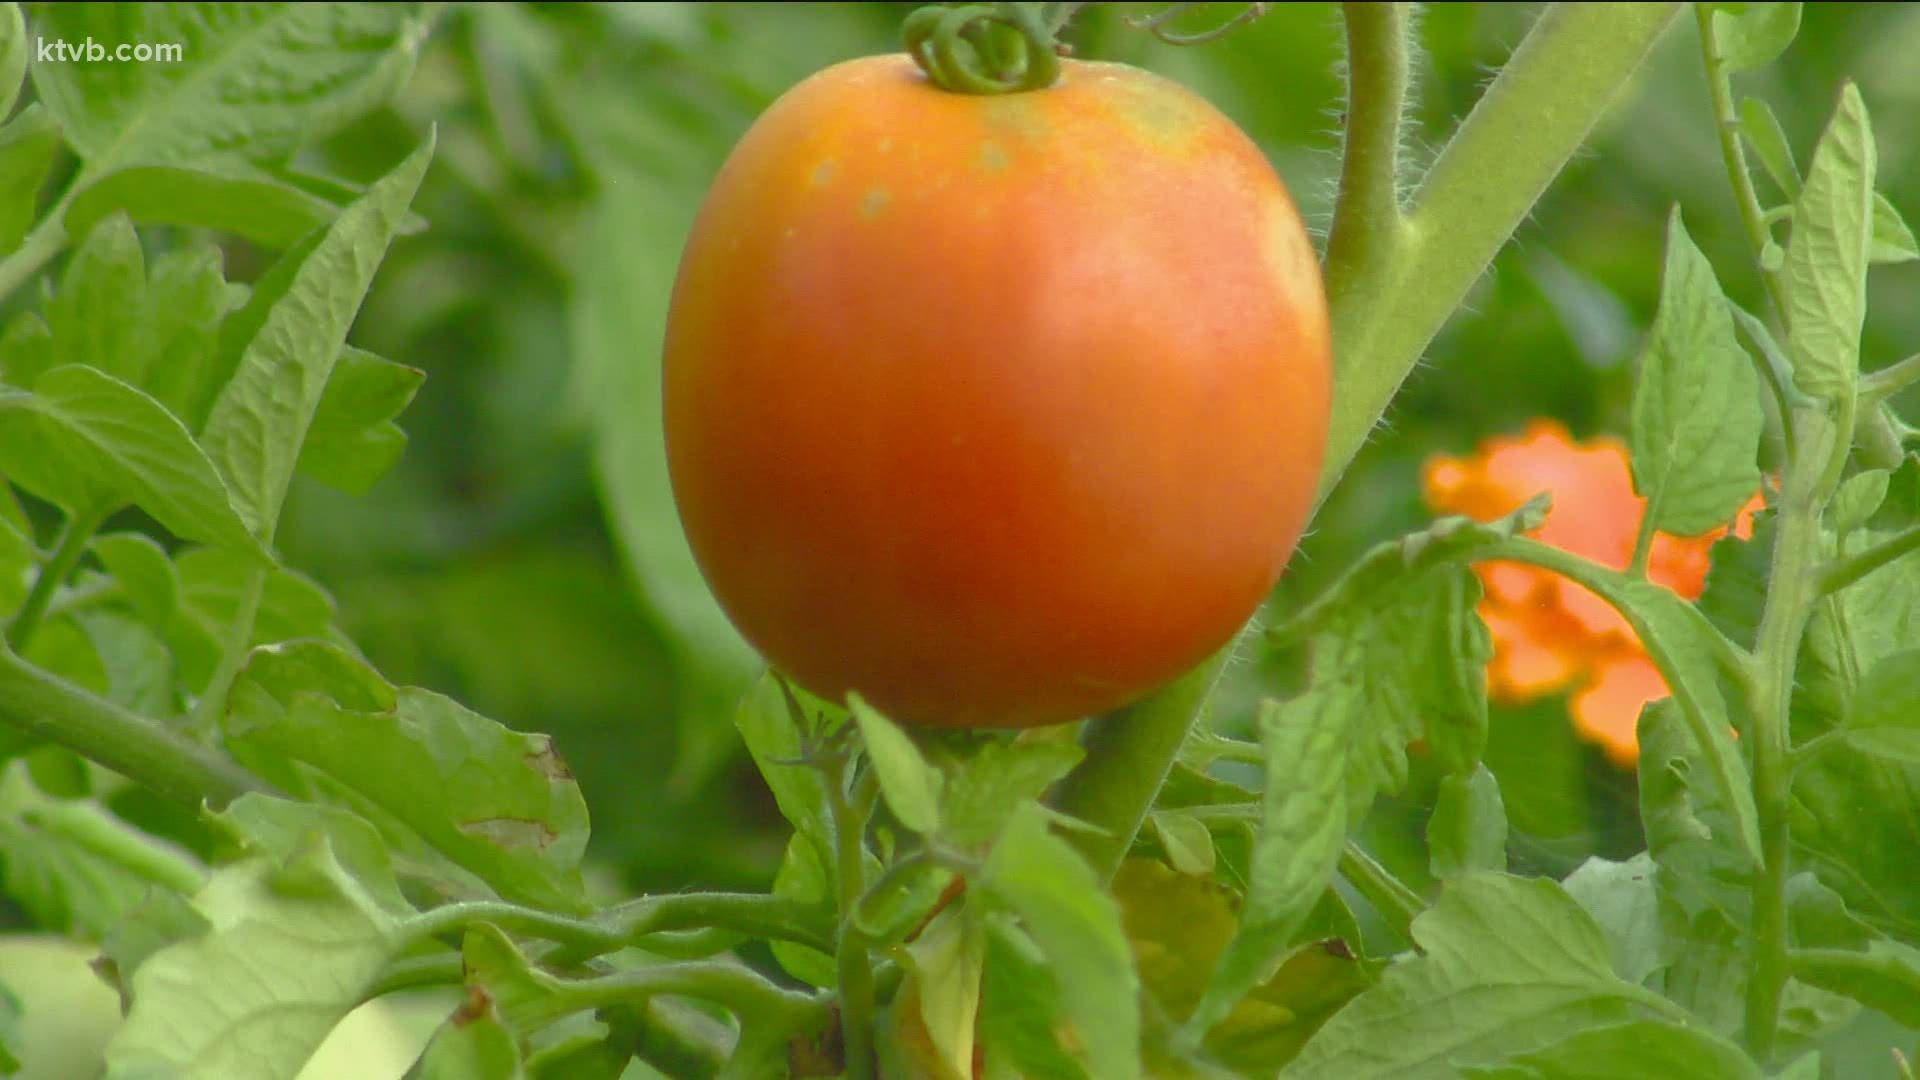 Jim Duthie shows us a few of his favorite tomatoes that you might want to plant in your garden.